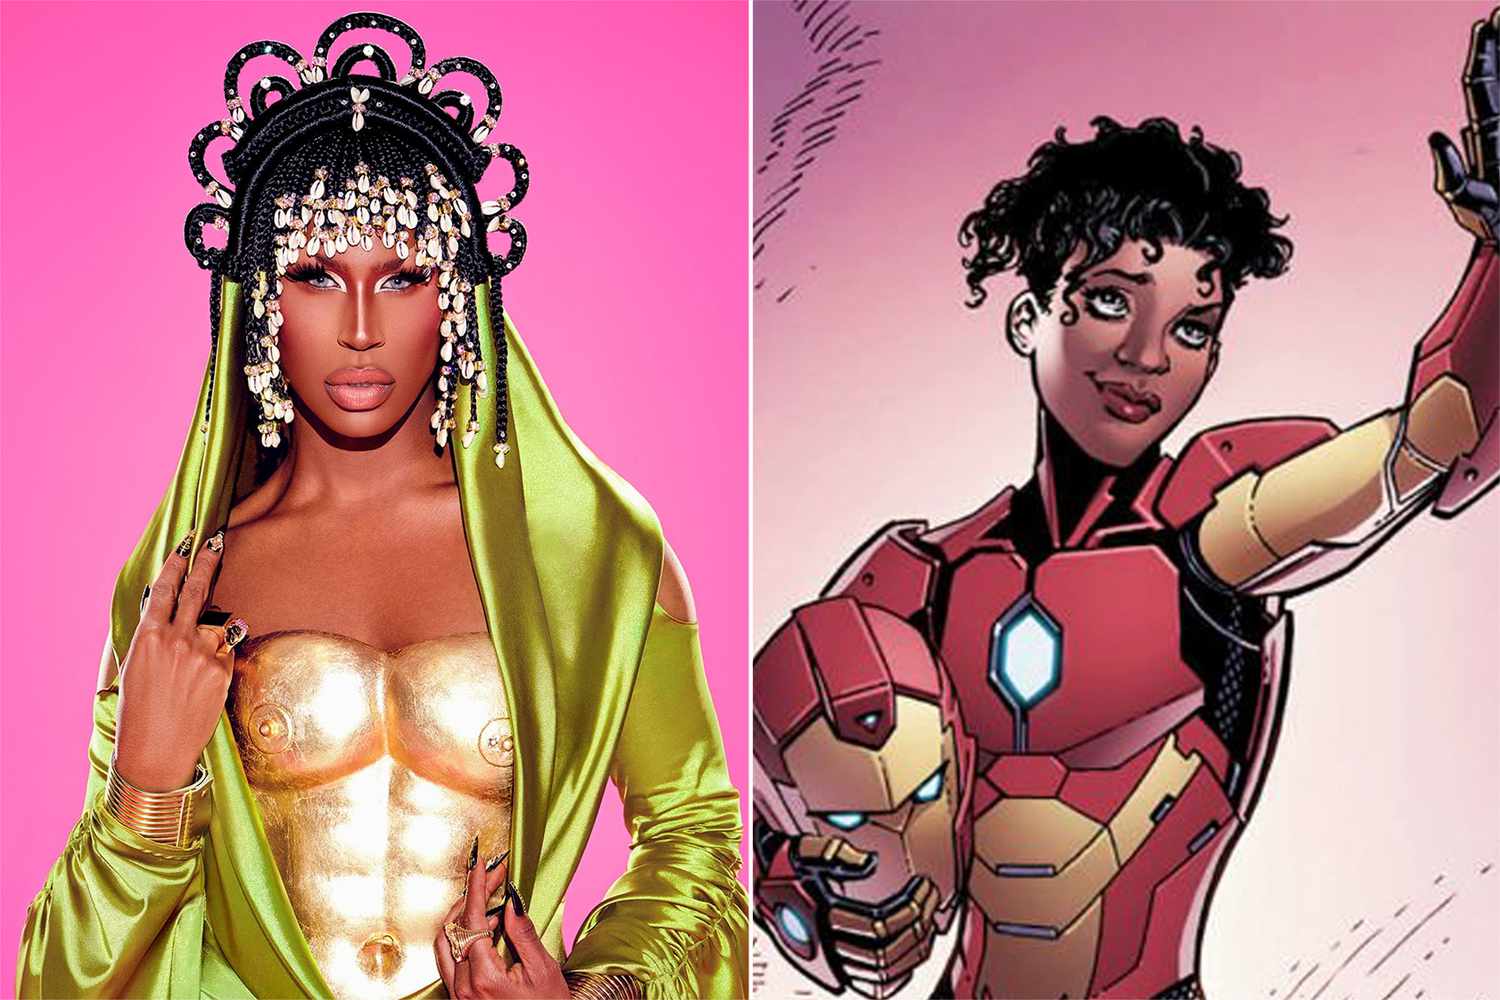 'Drag Race' icon Shea Couleé joins Marvel universe as 'Ironheart' series regular